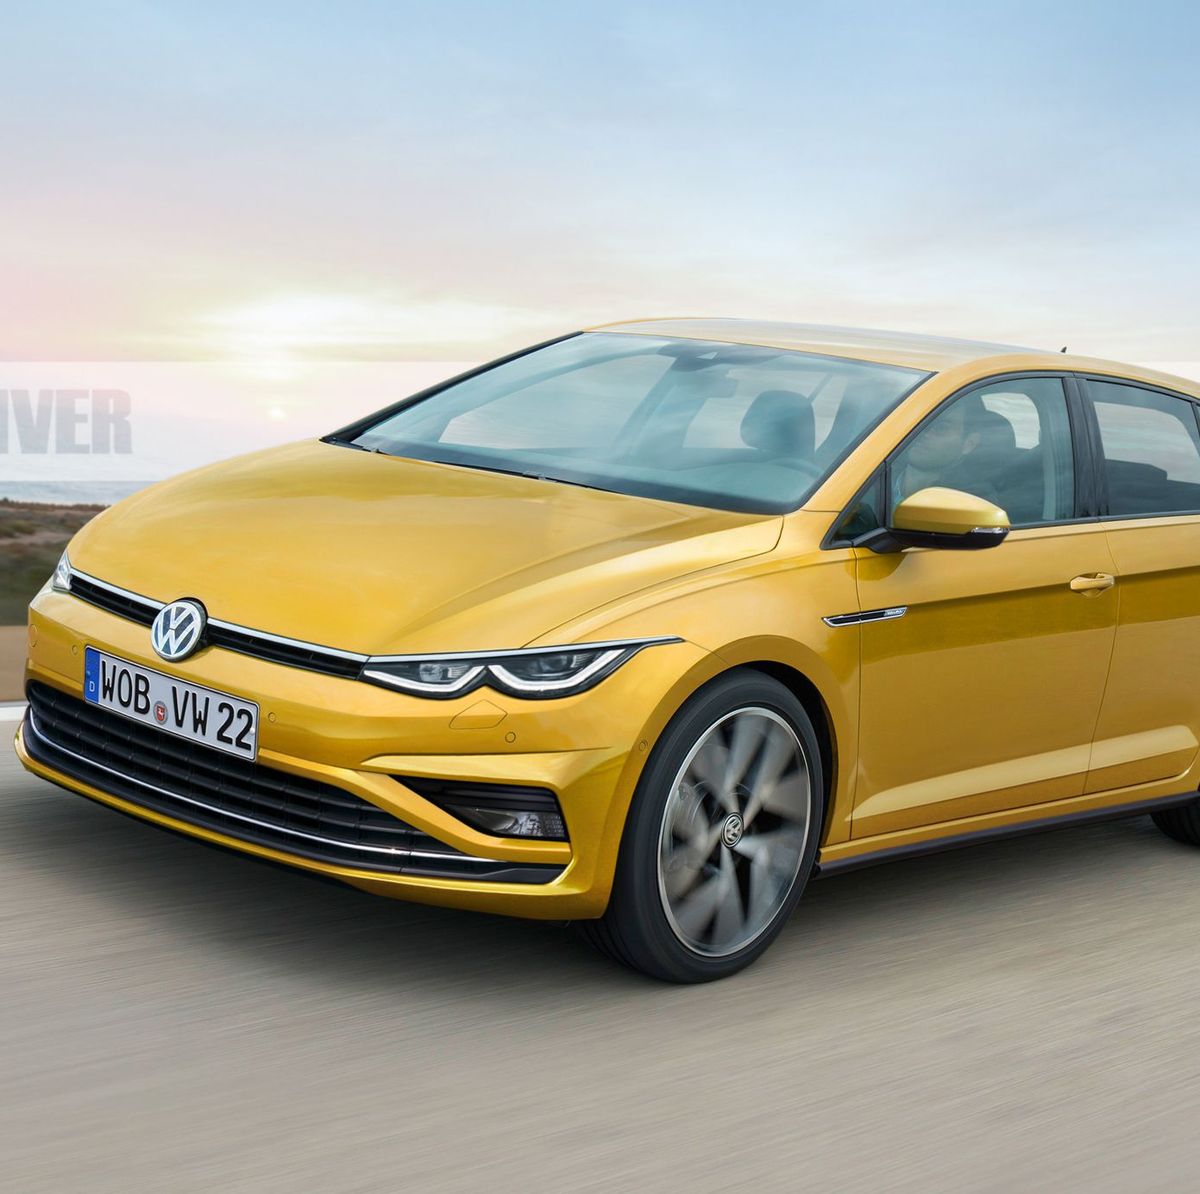 2021 Volkswagen Golf 8 Priced From More Than $30,000 Drive-away